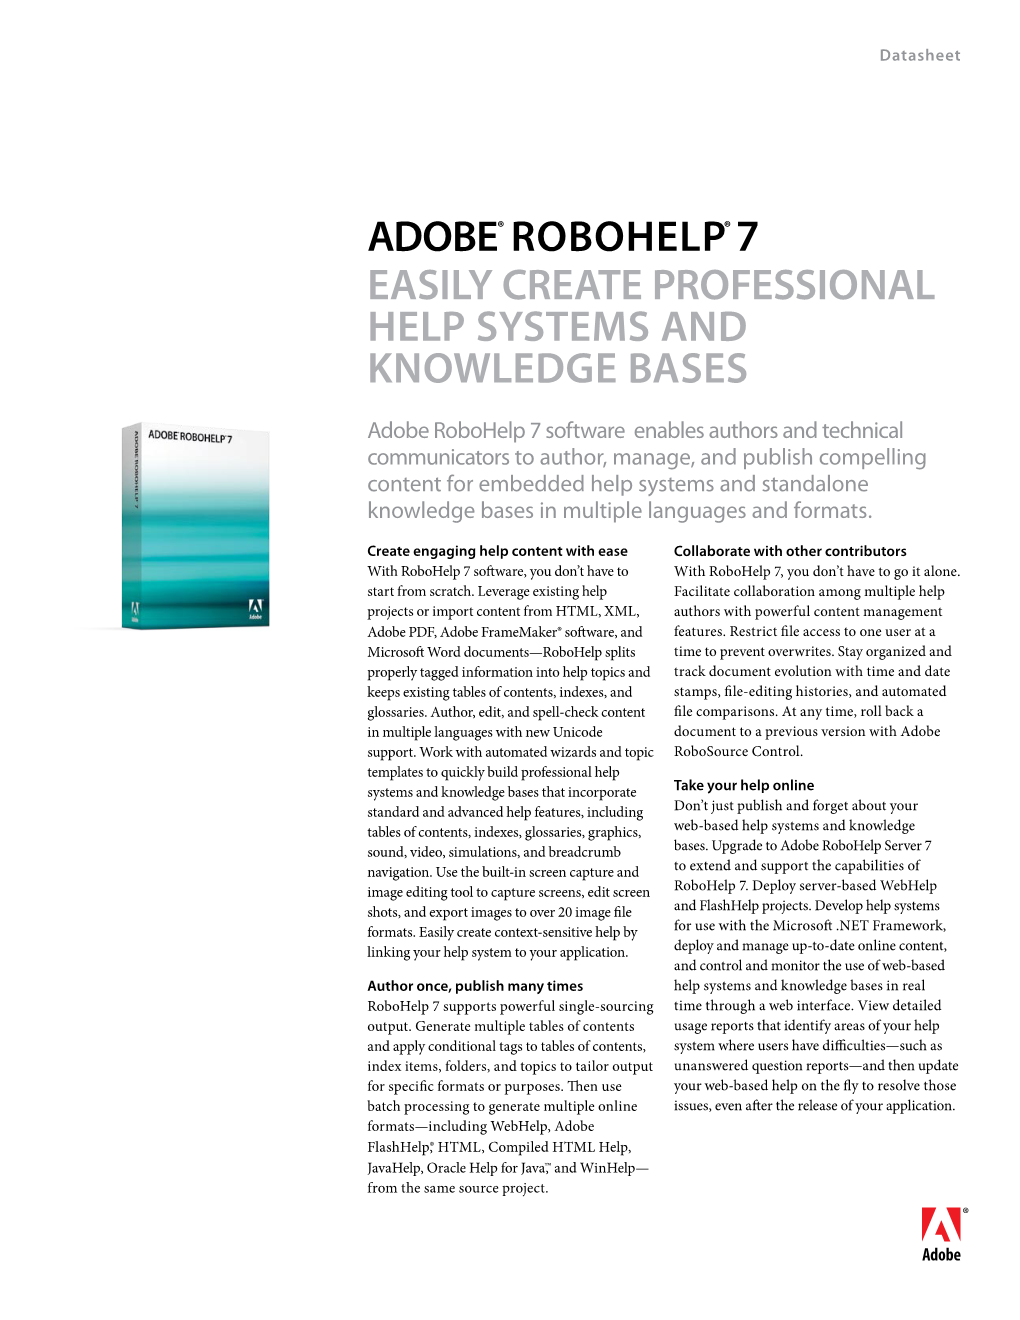 ADOBE® Robohelp® 7 Easily Create Professional Help Systems and Knowledge Bases